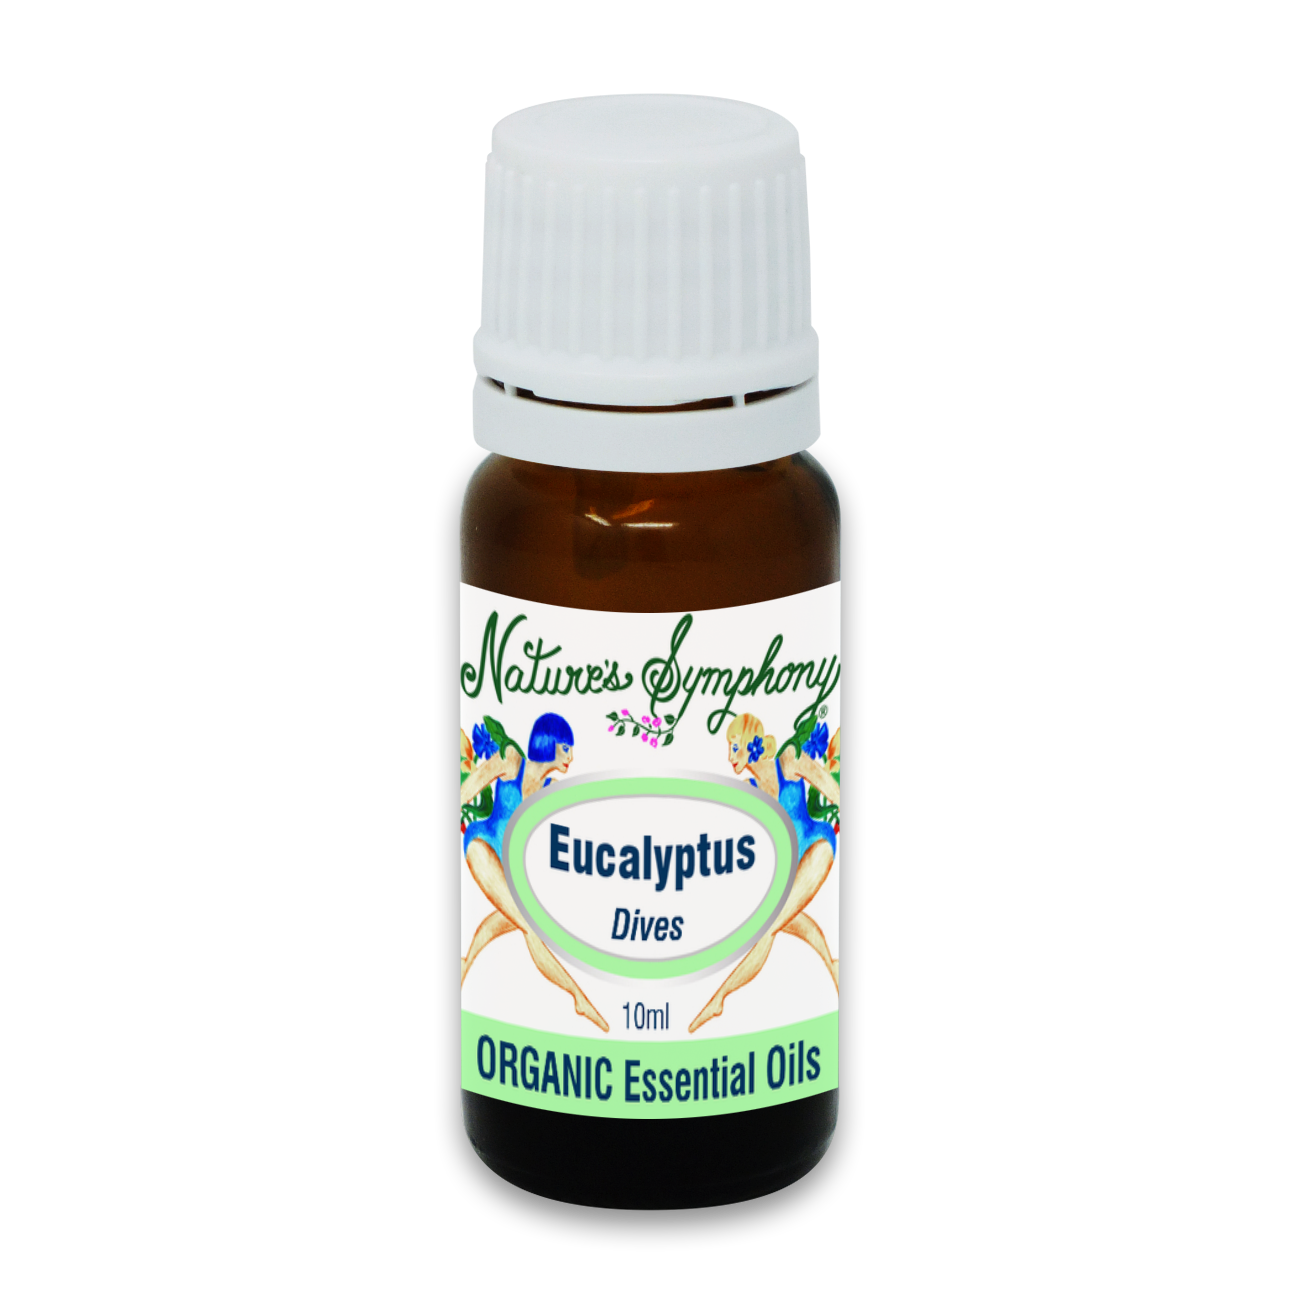 Eucalyptus Dives, Organic/Wildcrafted oil - 10ml